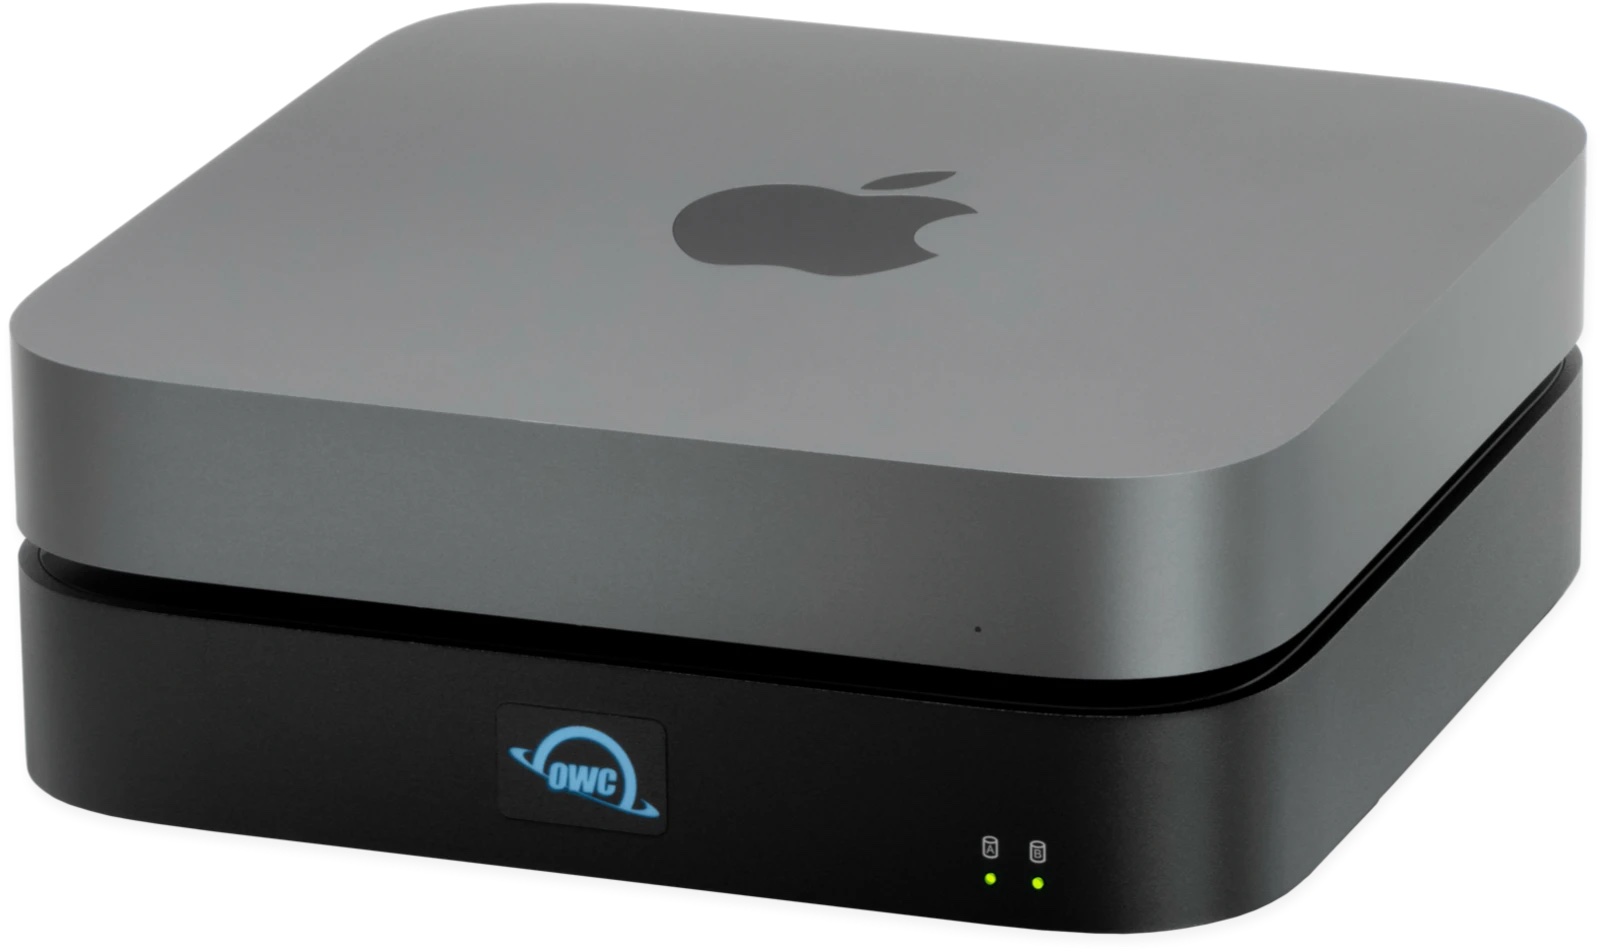 Advice for best TB docks in 2020 for a new MacMini